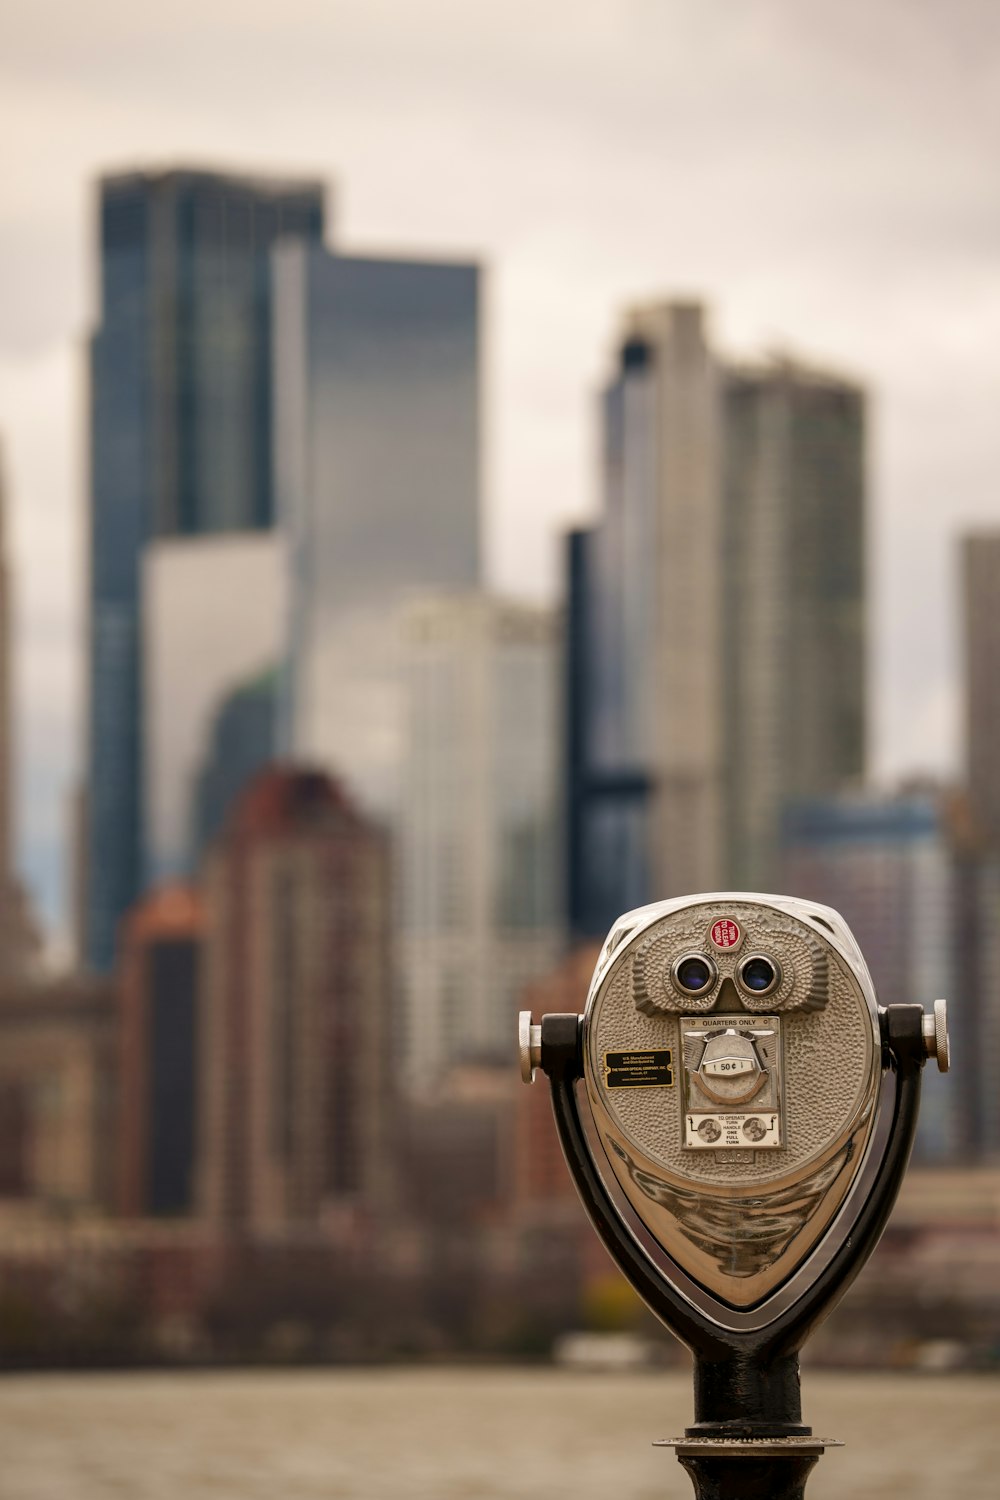 a coin operated parking meter in front of a city skyline